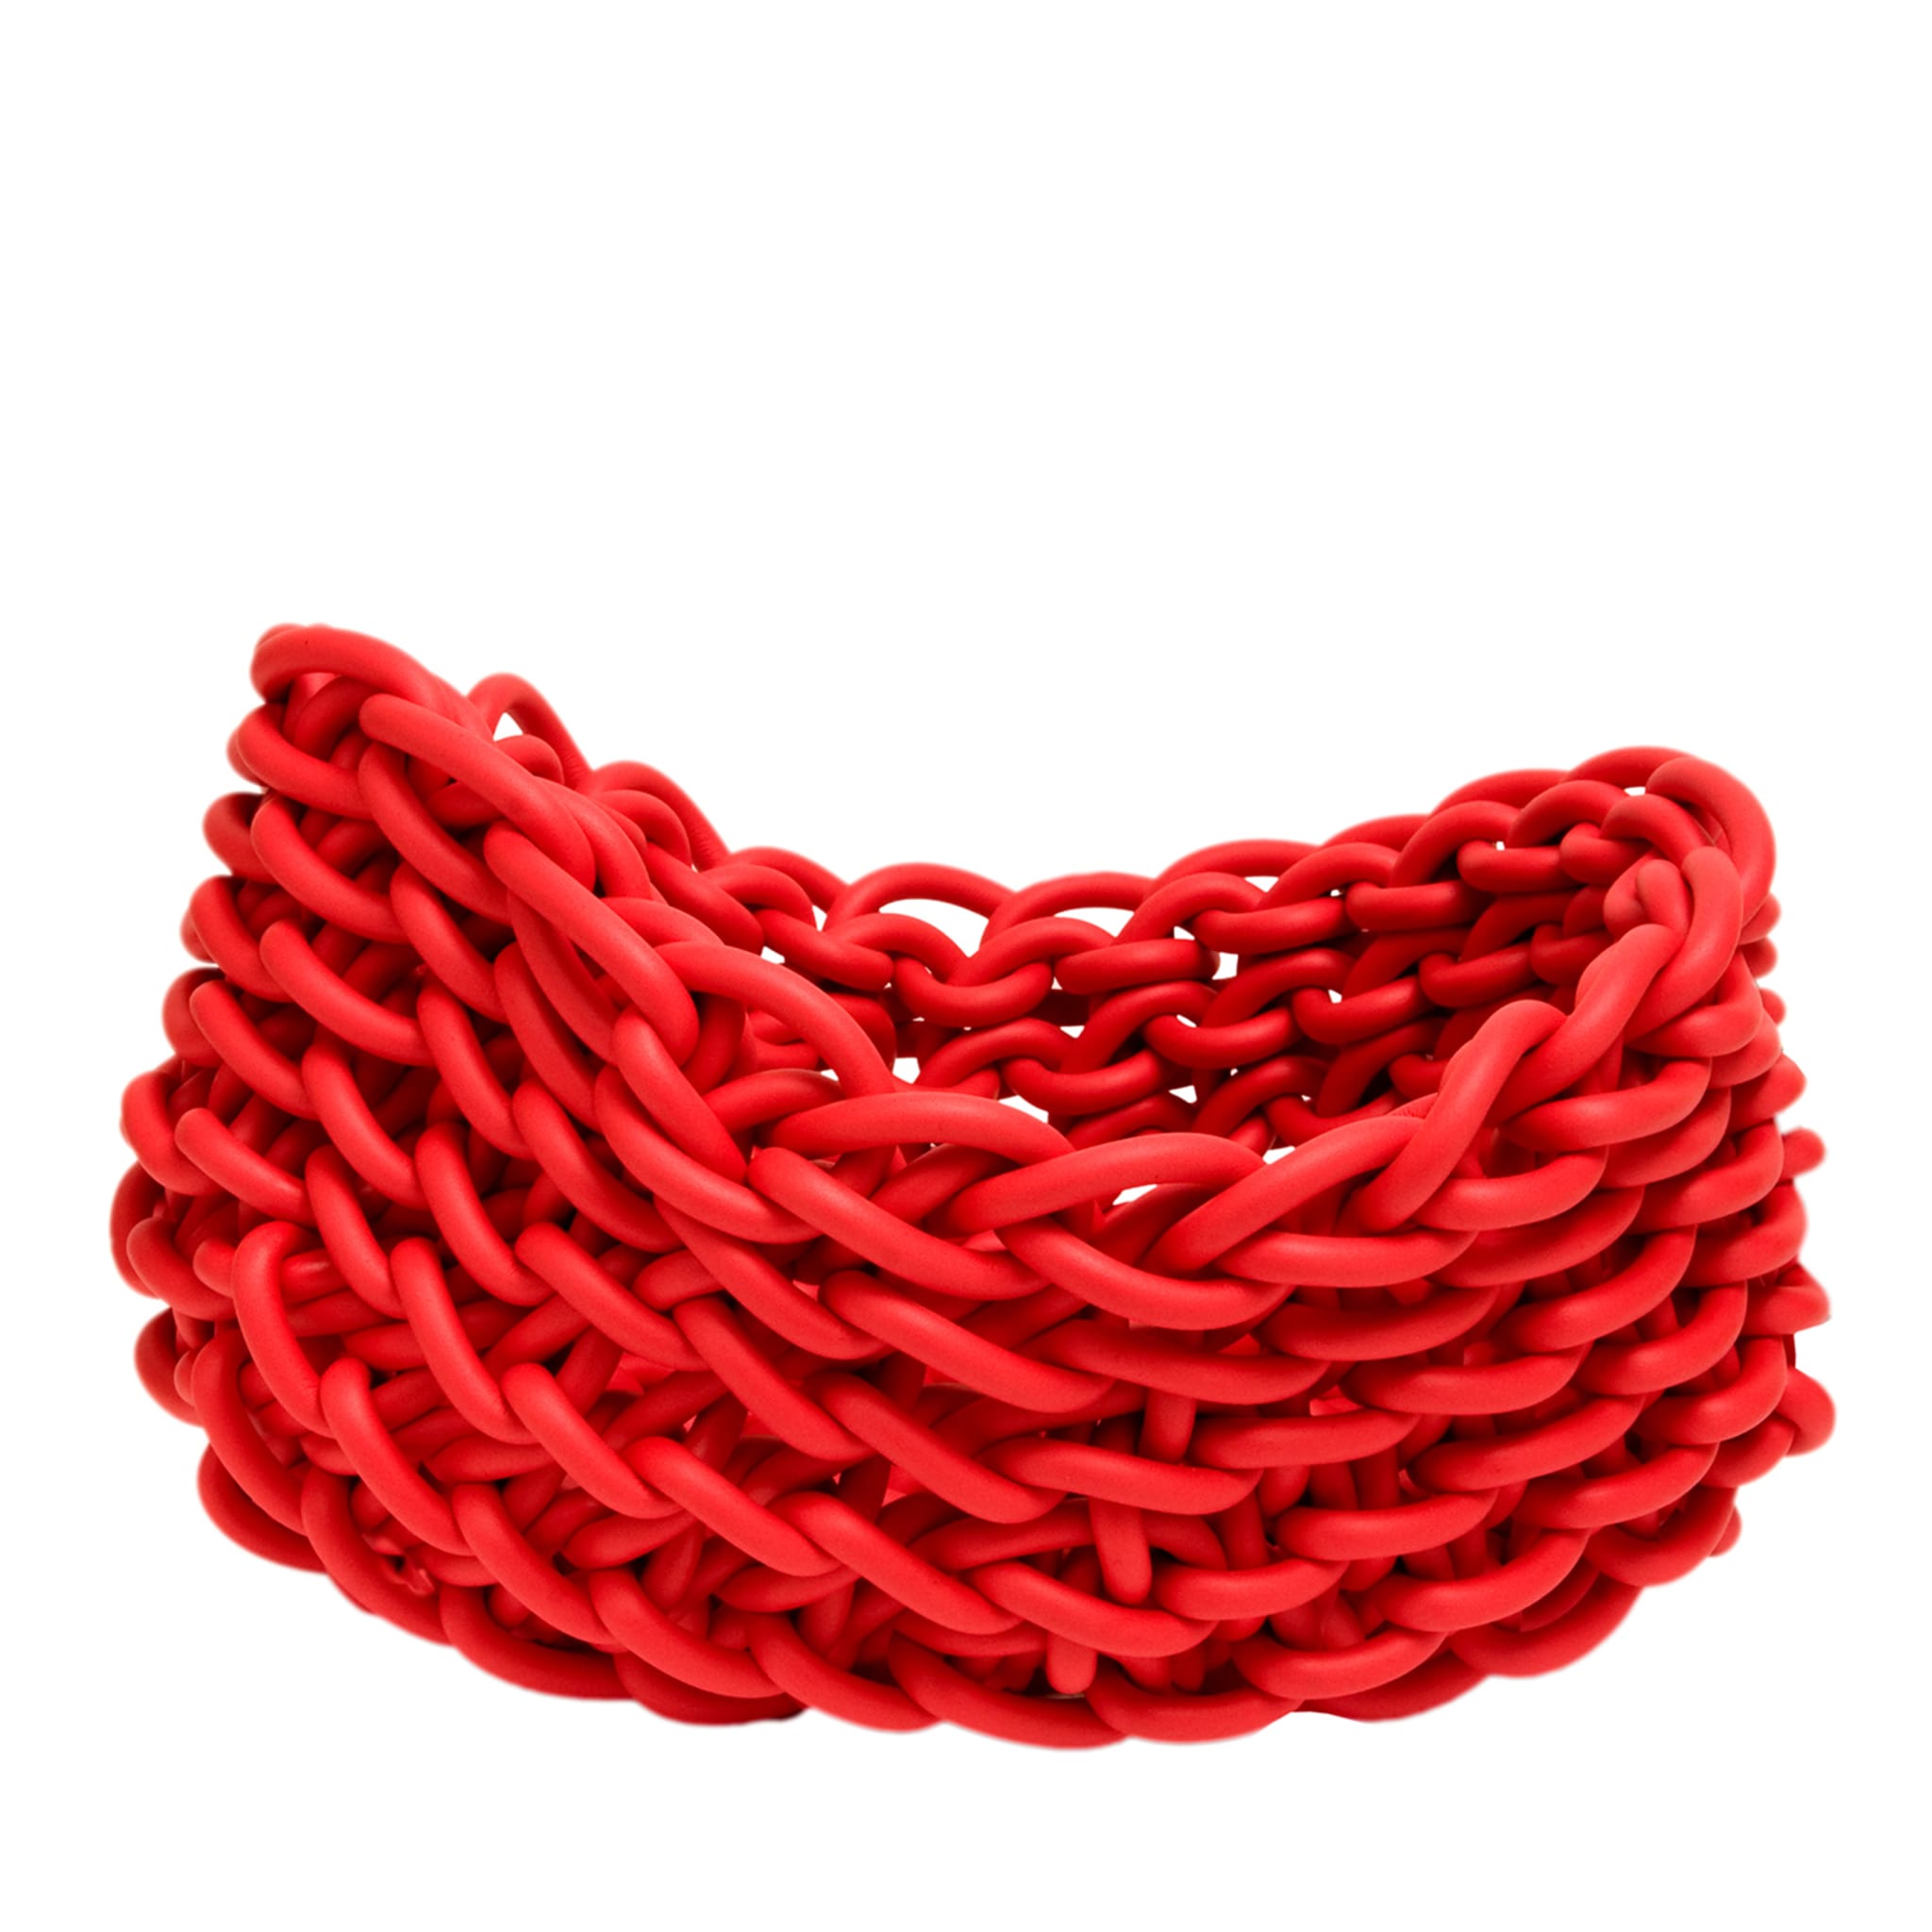 Barca Red Basket #1 by Rosanna Contadini - Main view